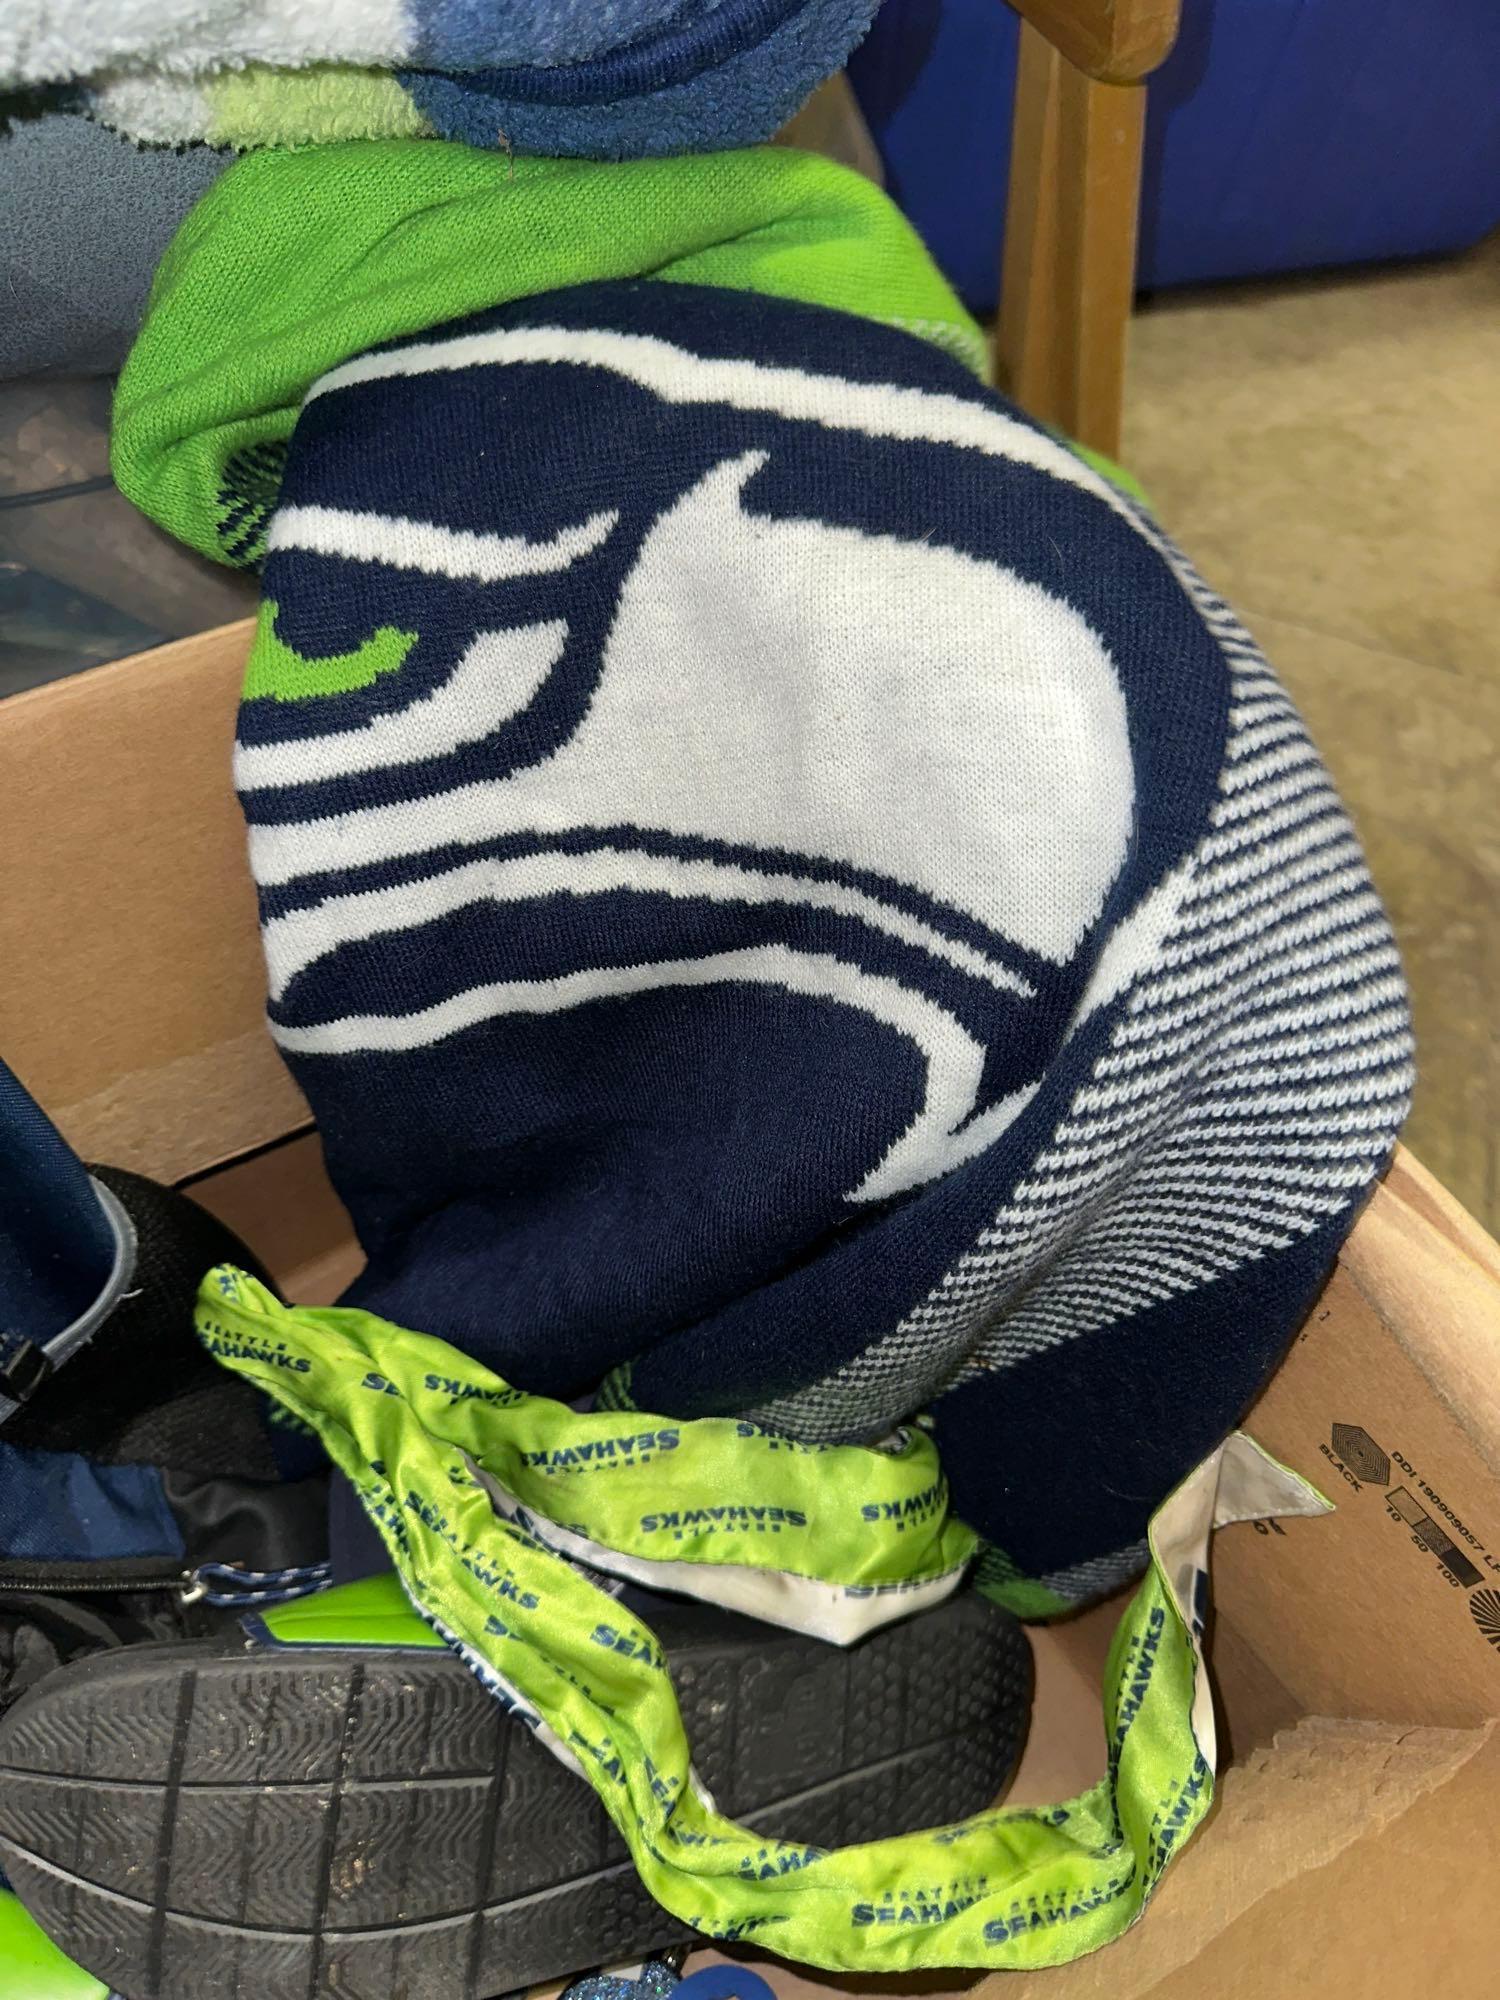 Seahawks Collectibles- Blanket, Sweater, Backpack, Slides and more